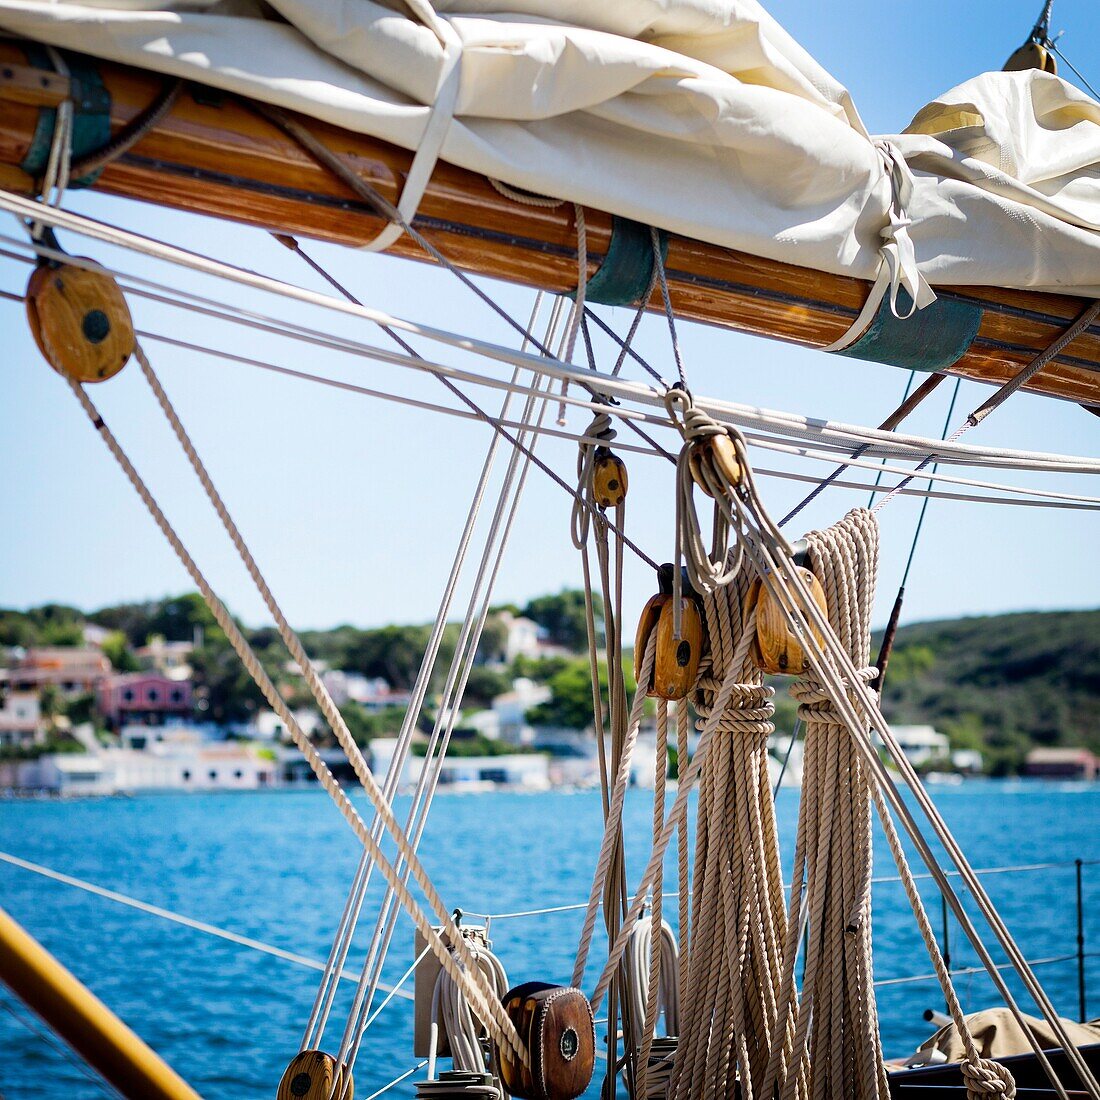 Close up of masts and rigging from a vintage boat, with a blue sky in the background. pulleys, sails and ropes. Port Mahon, Menorca, Biosphera Reserve, Balearic Islands, Spain, Europe.